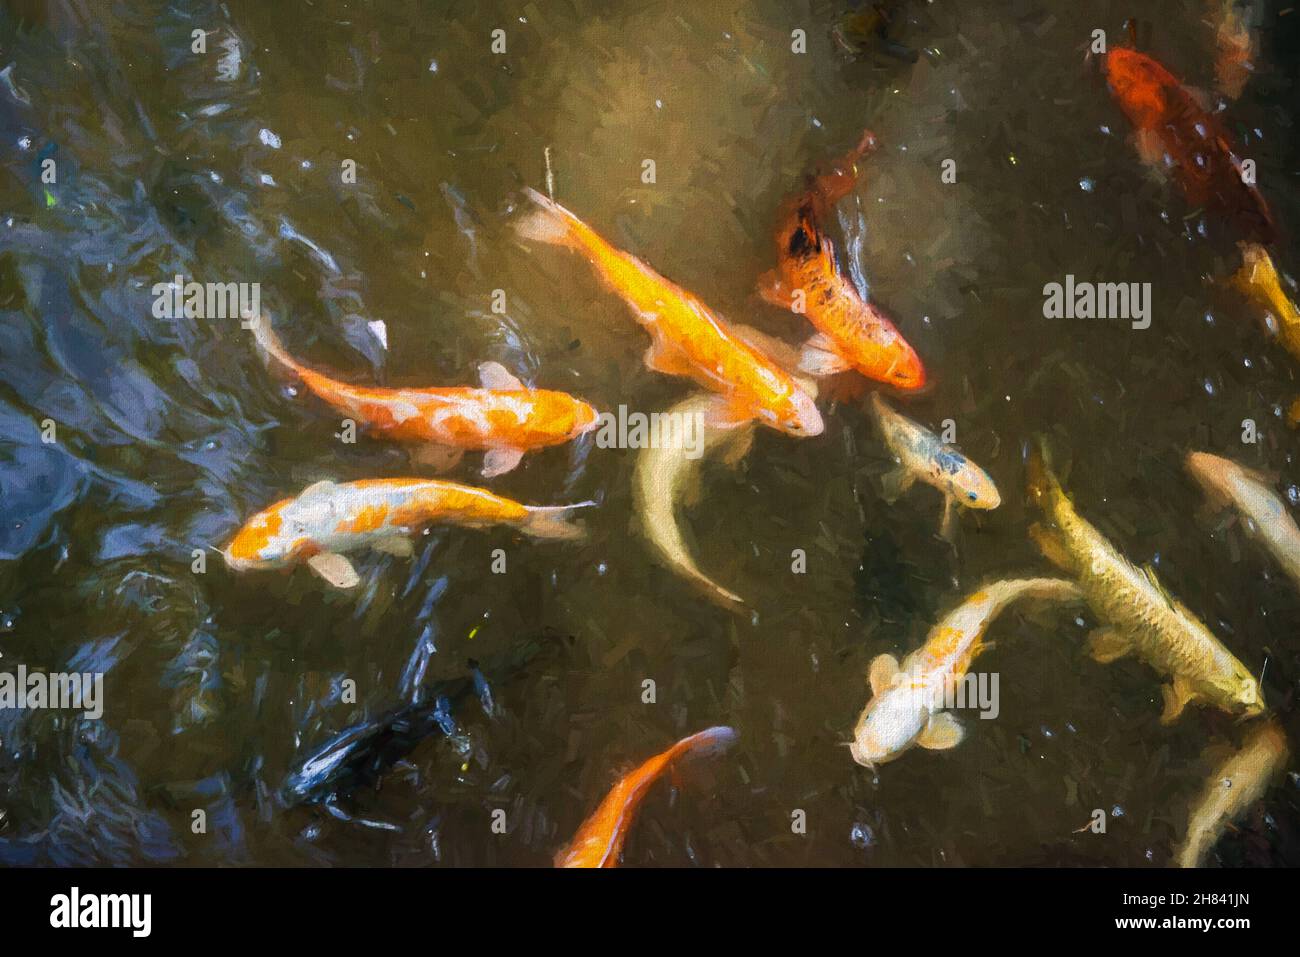 Multi colored gold fish / Koi fish or carp aiming in a pond with the warm golden sunlight shining down thru into the lake in a zen like relaxing way Stock Photo